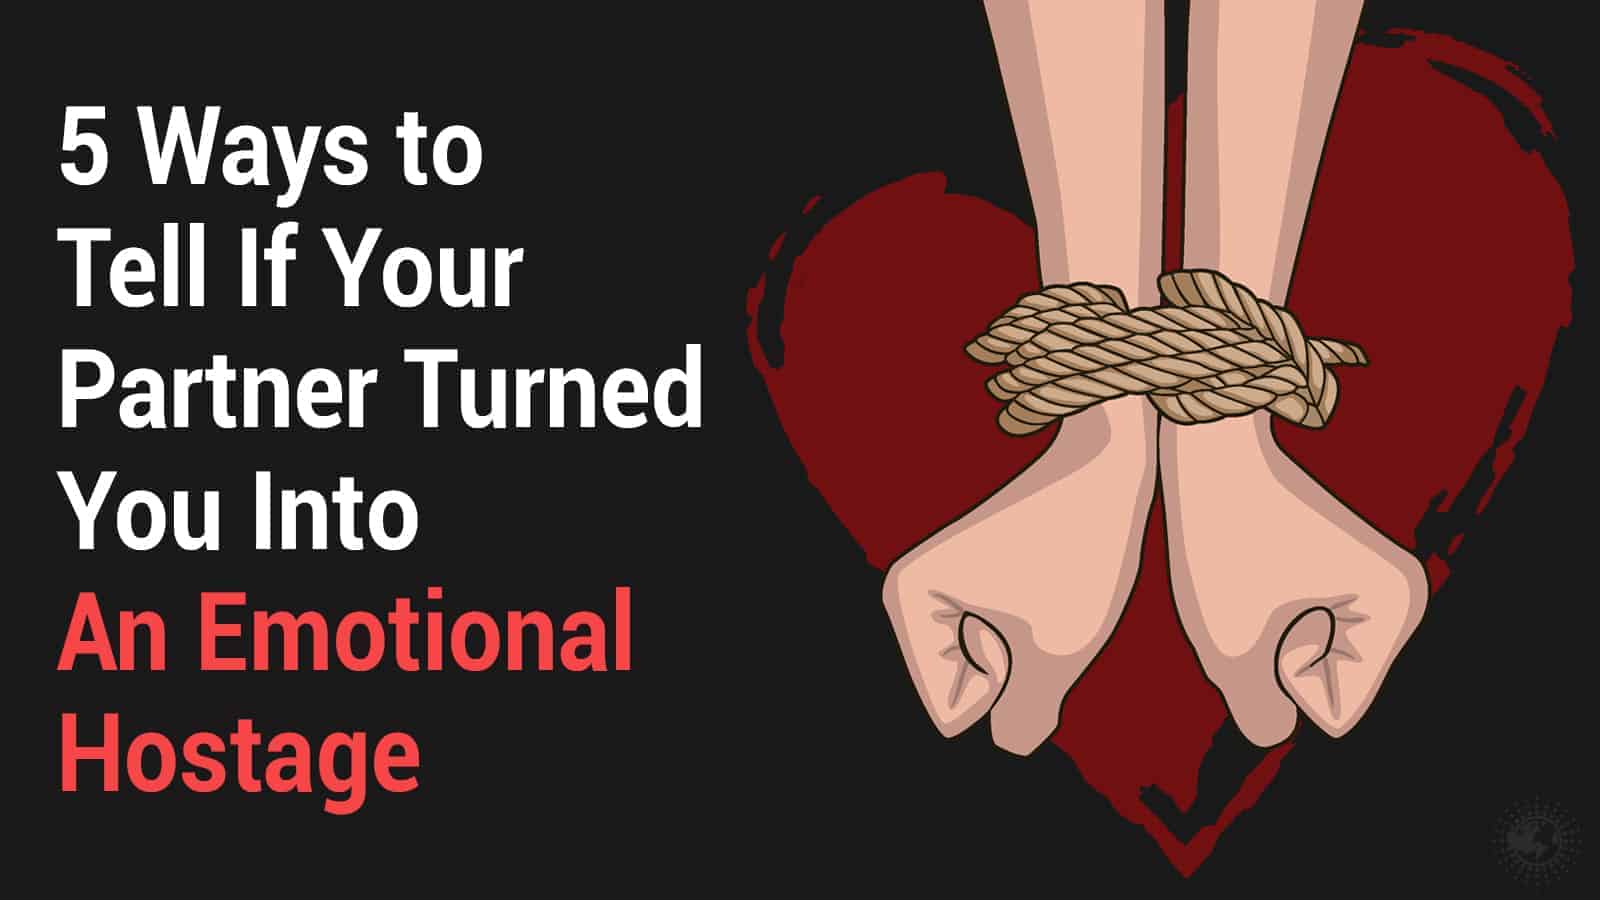 5 Ways to Tell If Your Partner Turned You Into An Emotional Hostage